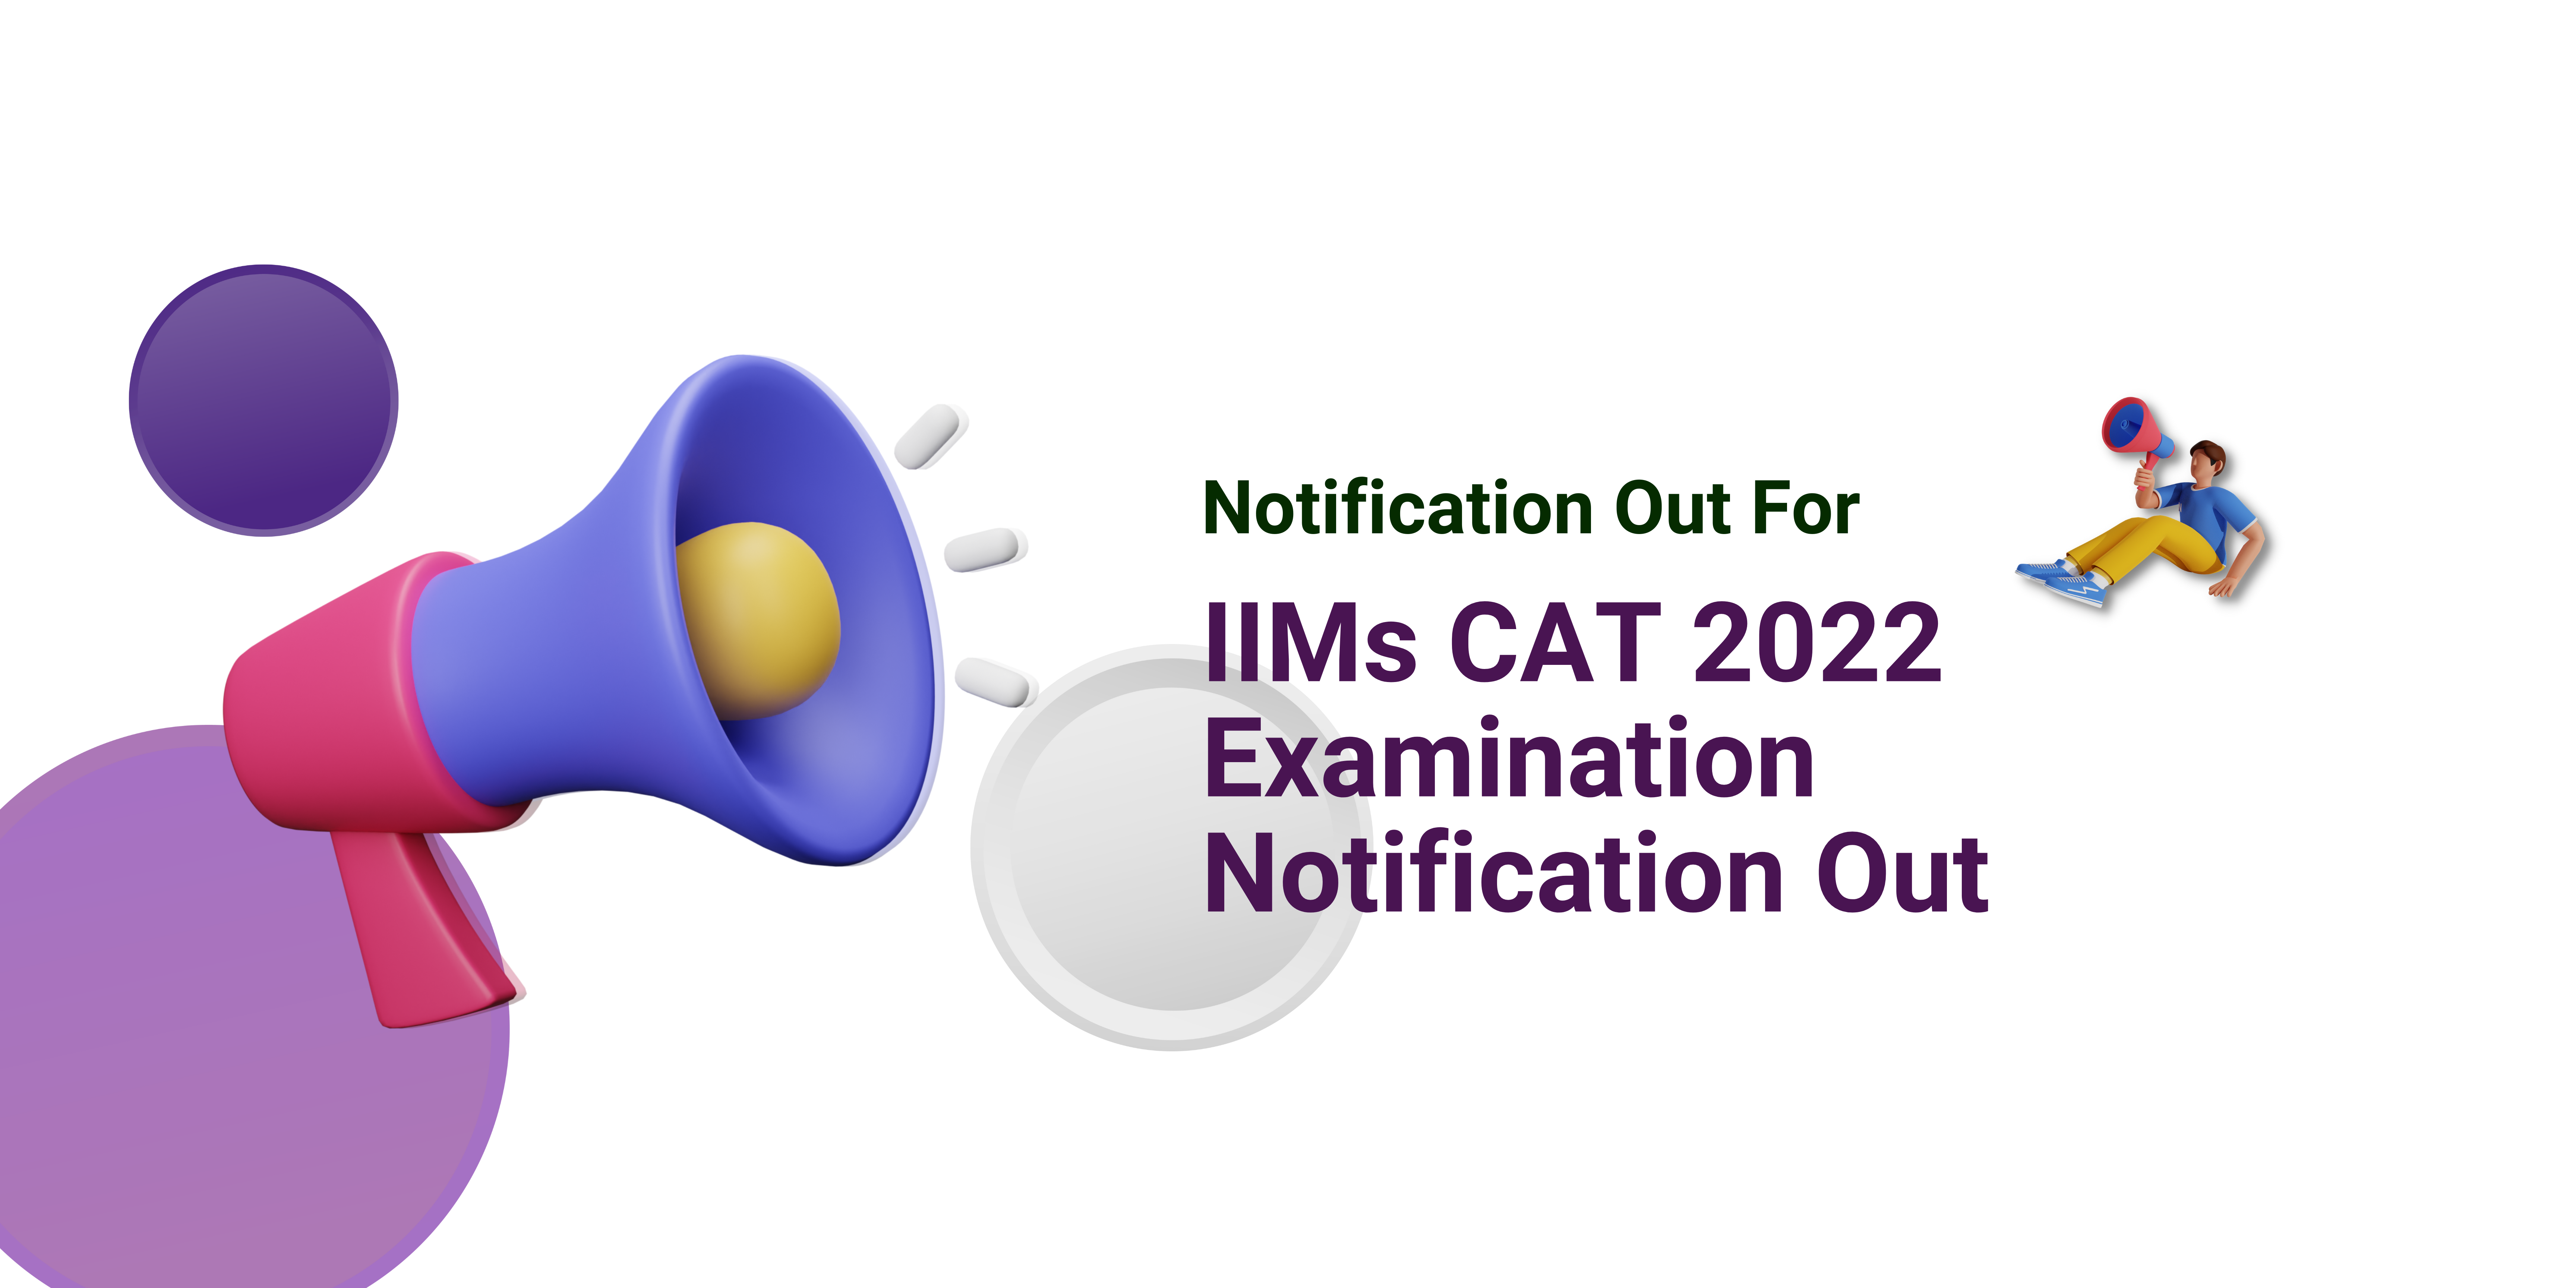 IIMs CAT 2022 Examination Notification Out